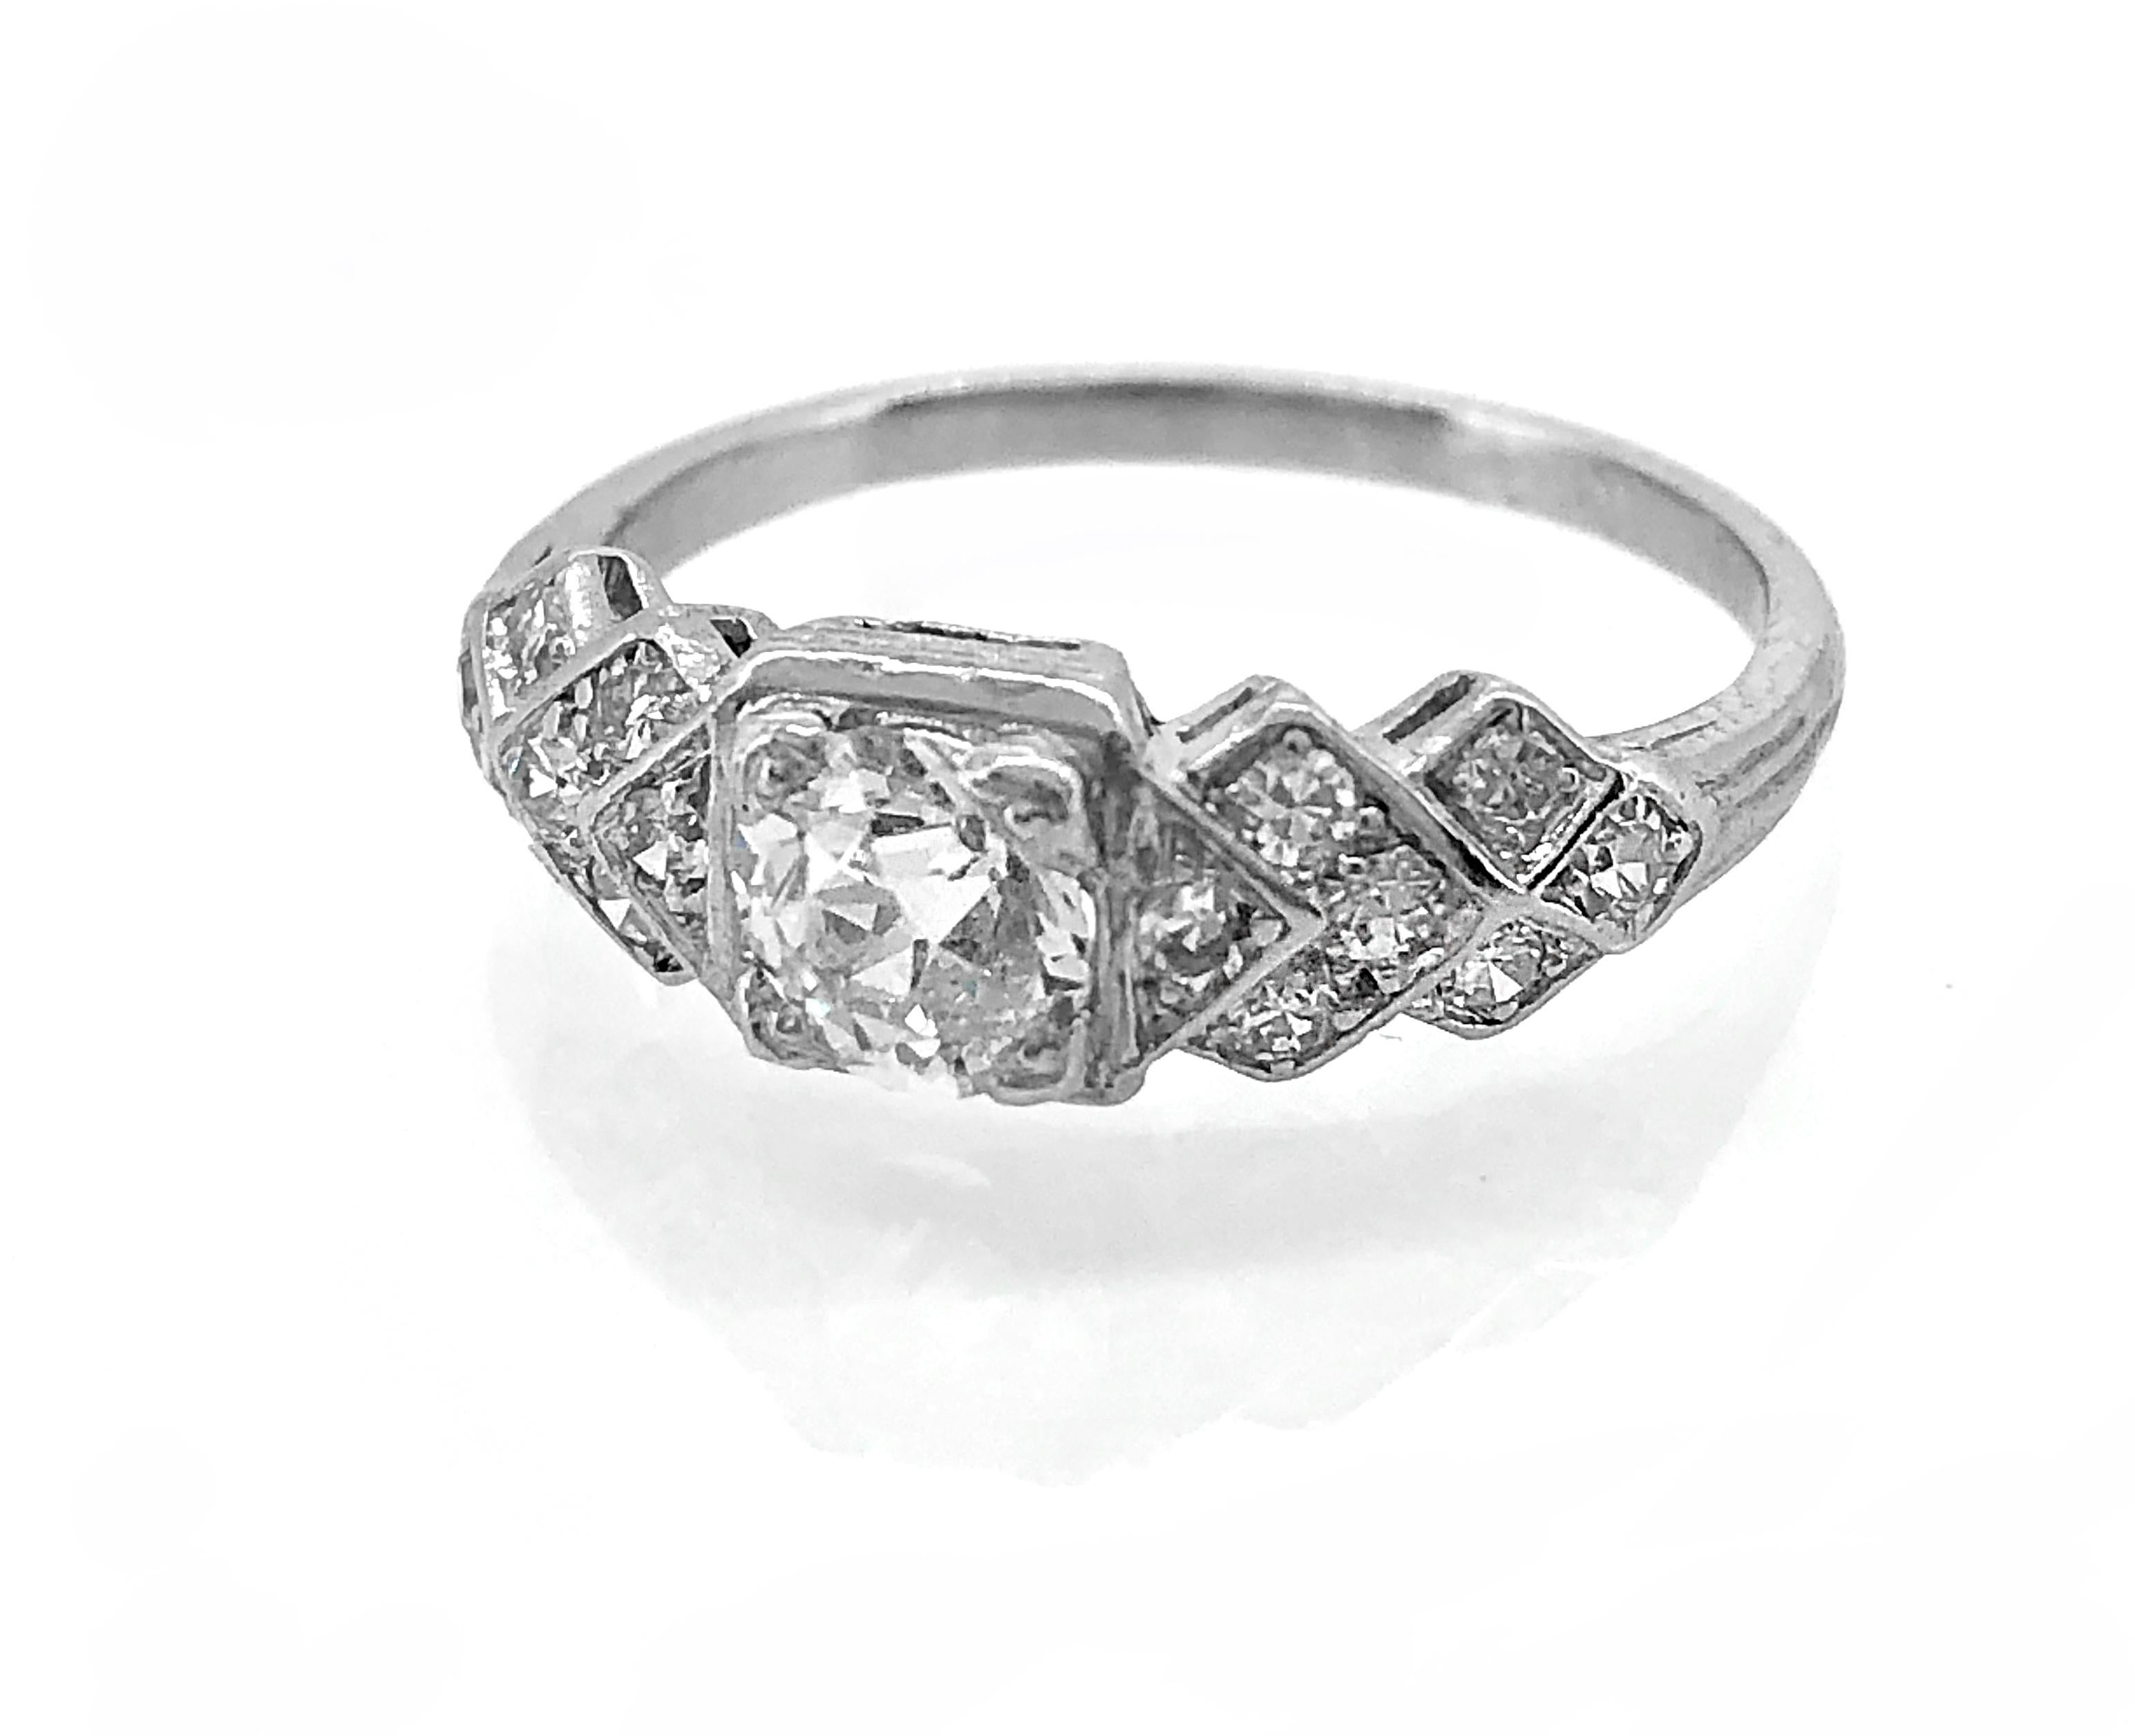 A bright and sparkling diamond Antique engagement ring, from the Art Deco time period, features a .43ct. apx. European cut diamond with VS2 clarity and K-L color. The accenting single cut diamond melee decorates the sides of the center diamond and